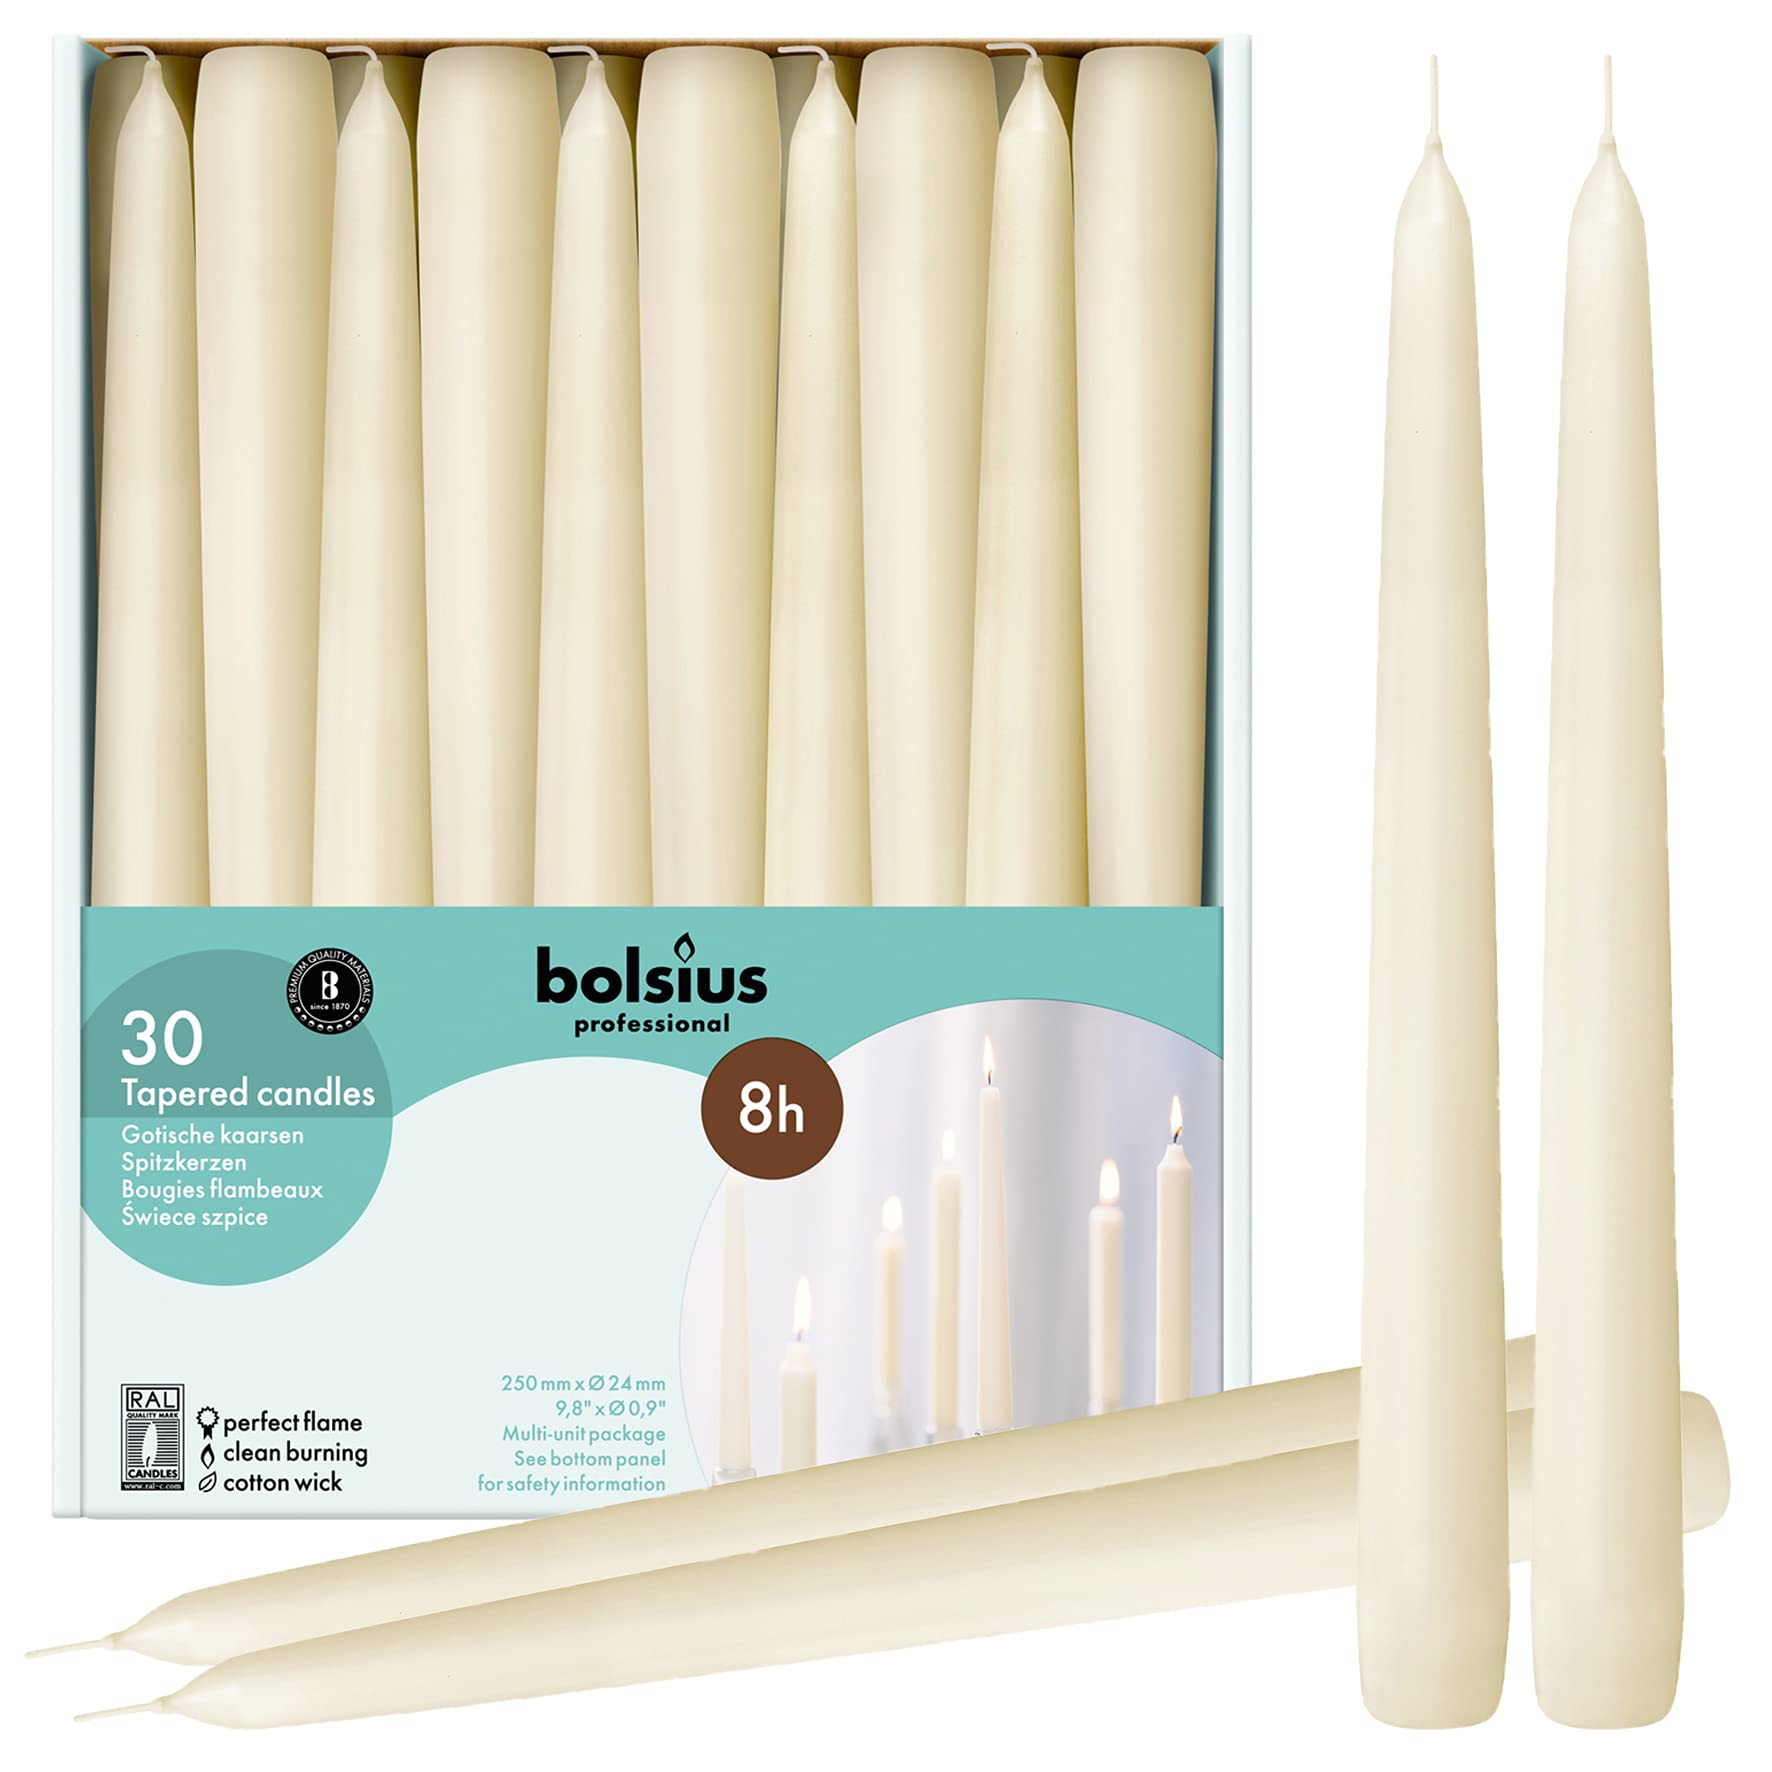 BOLSIUS 30 Count Household Ivory Taper Candles - 10 Inches - Premium European Quality - 8 Burn Hours - Bulk Pack Unscented Dripless and Smokeless Home D�cor, Restaurant, Wedding, & Party Candlesticks  - Good